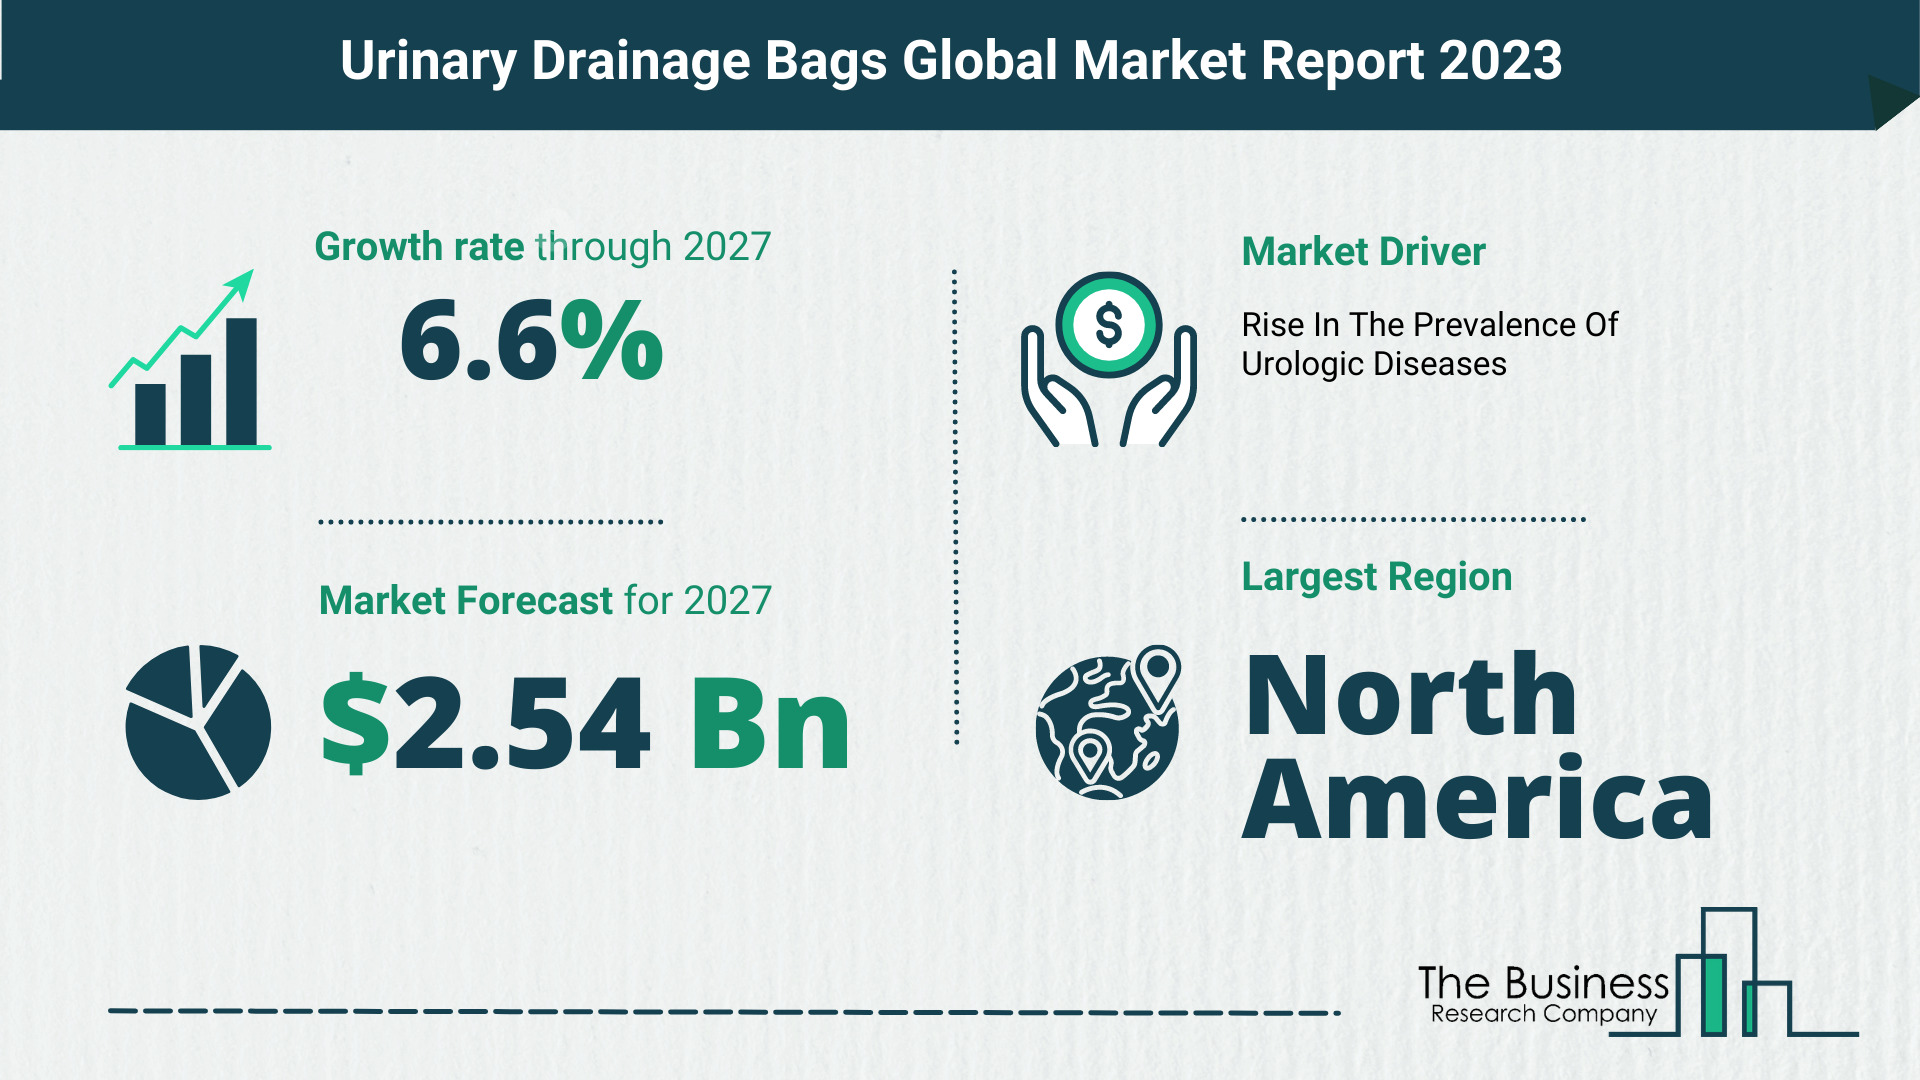 Global Urinary Drainage Bags Market Opportunities And Strategies 2023